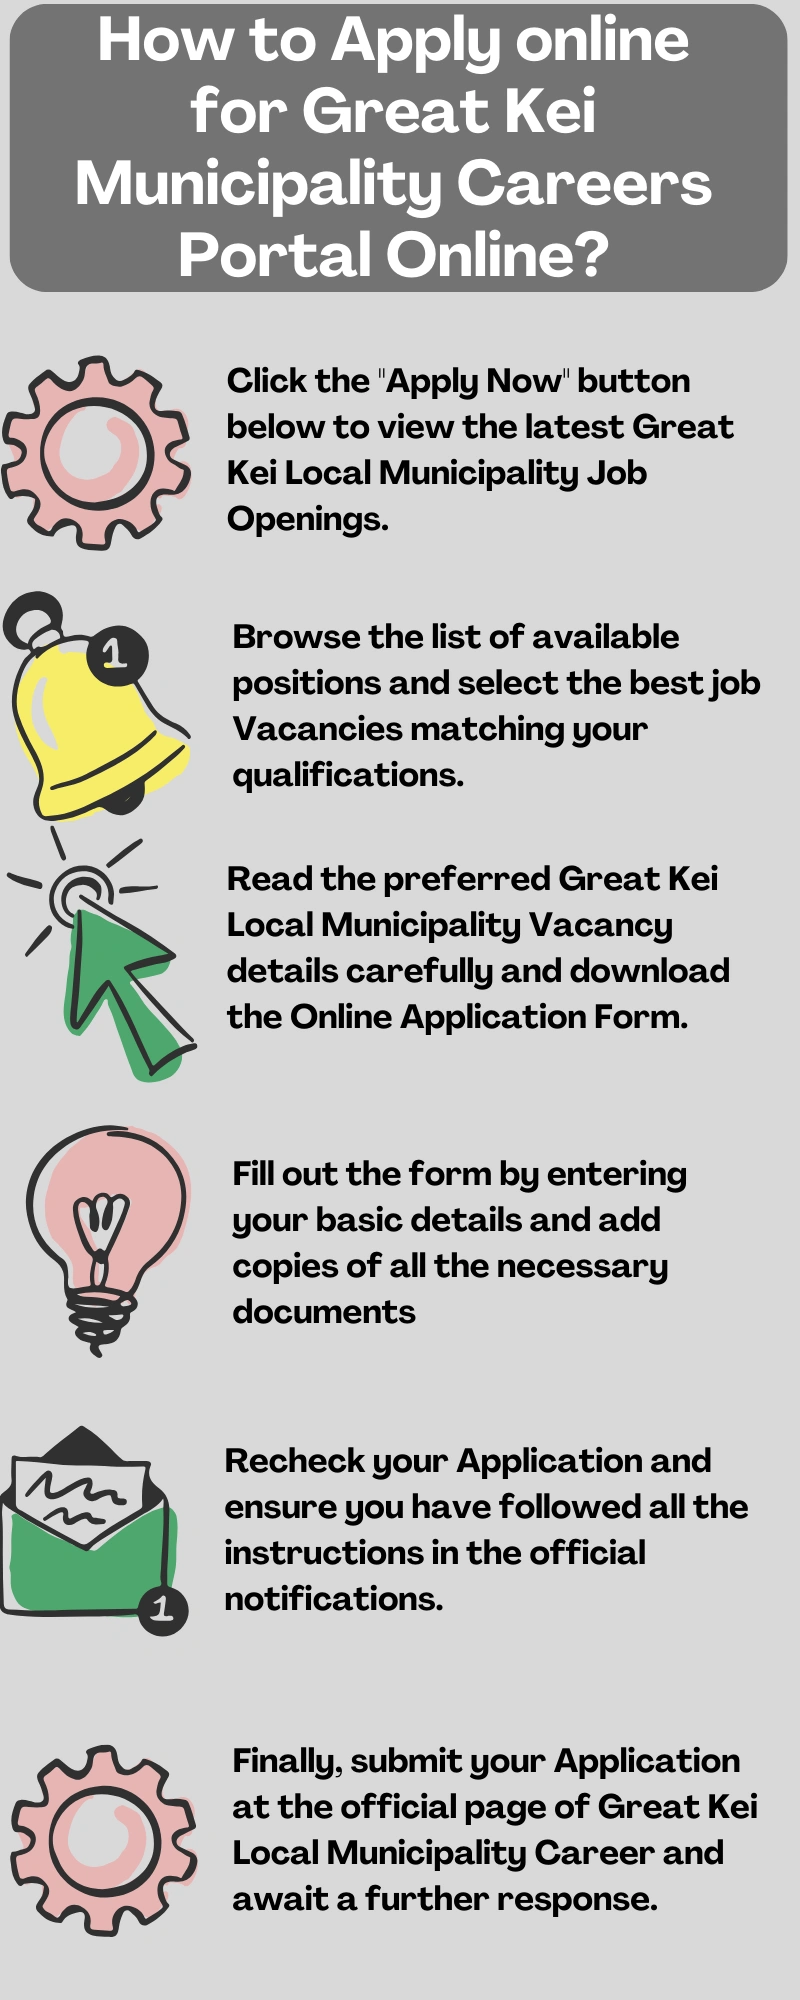 How to Apply online for Great Kei Municipality Careers Portal Online?